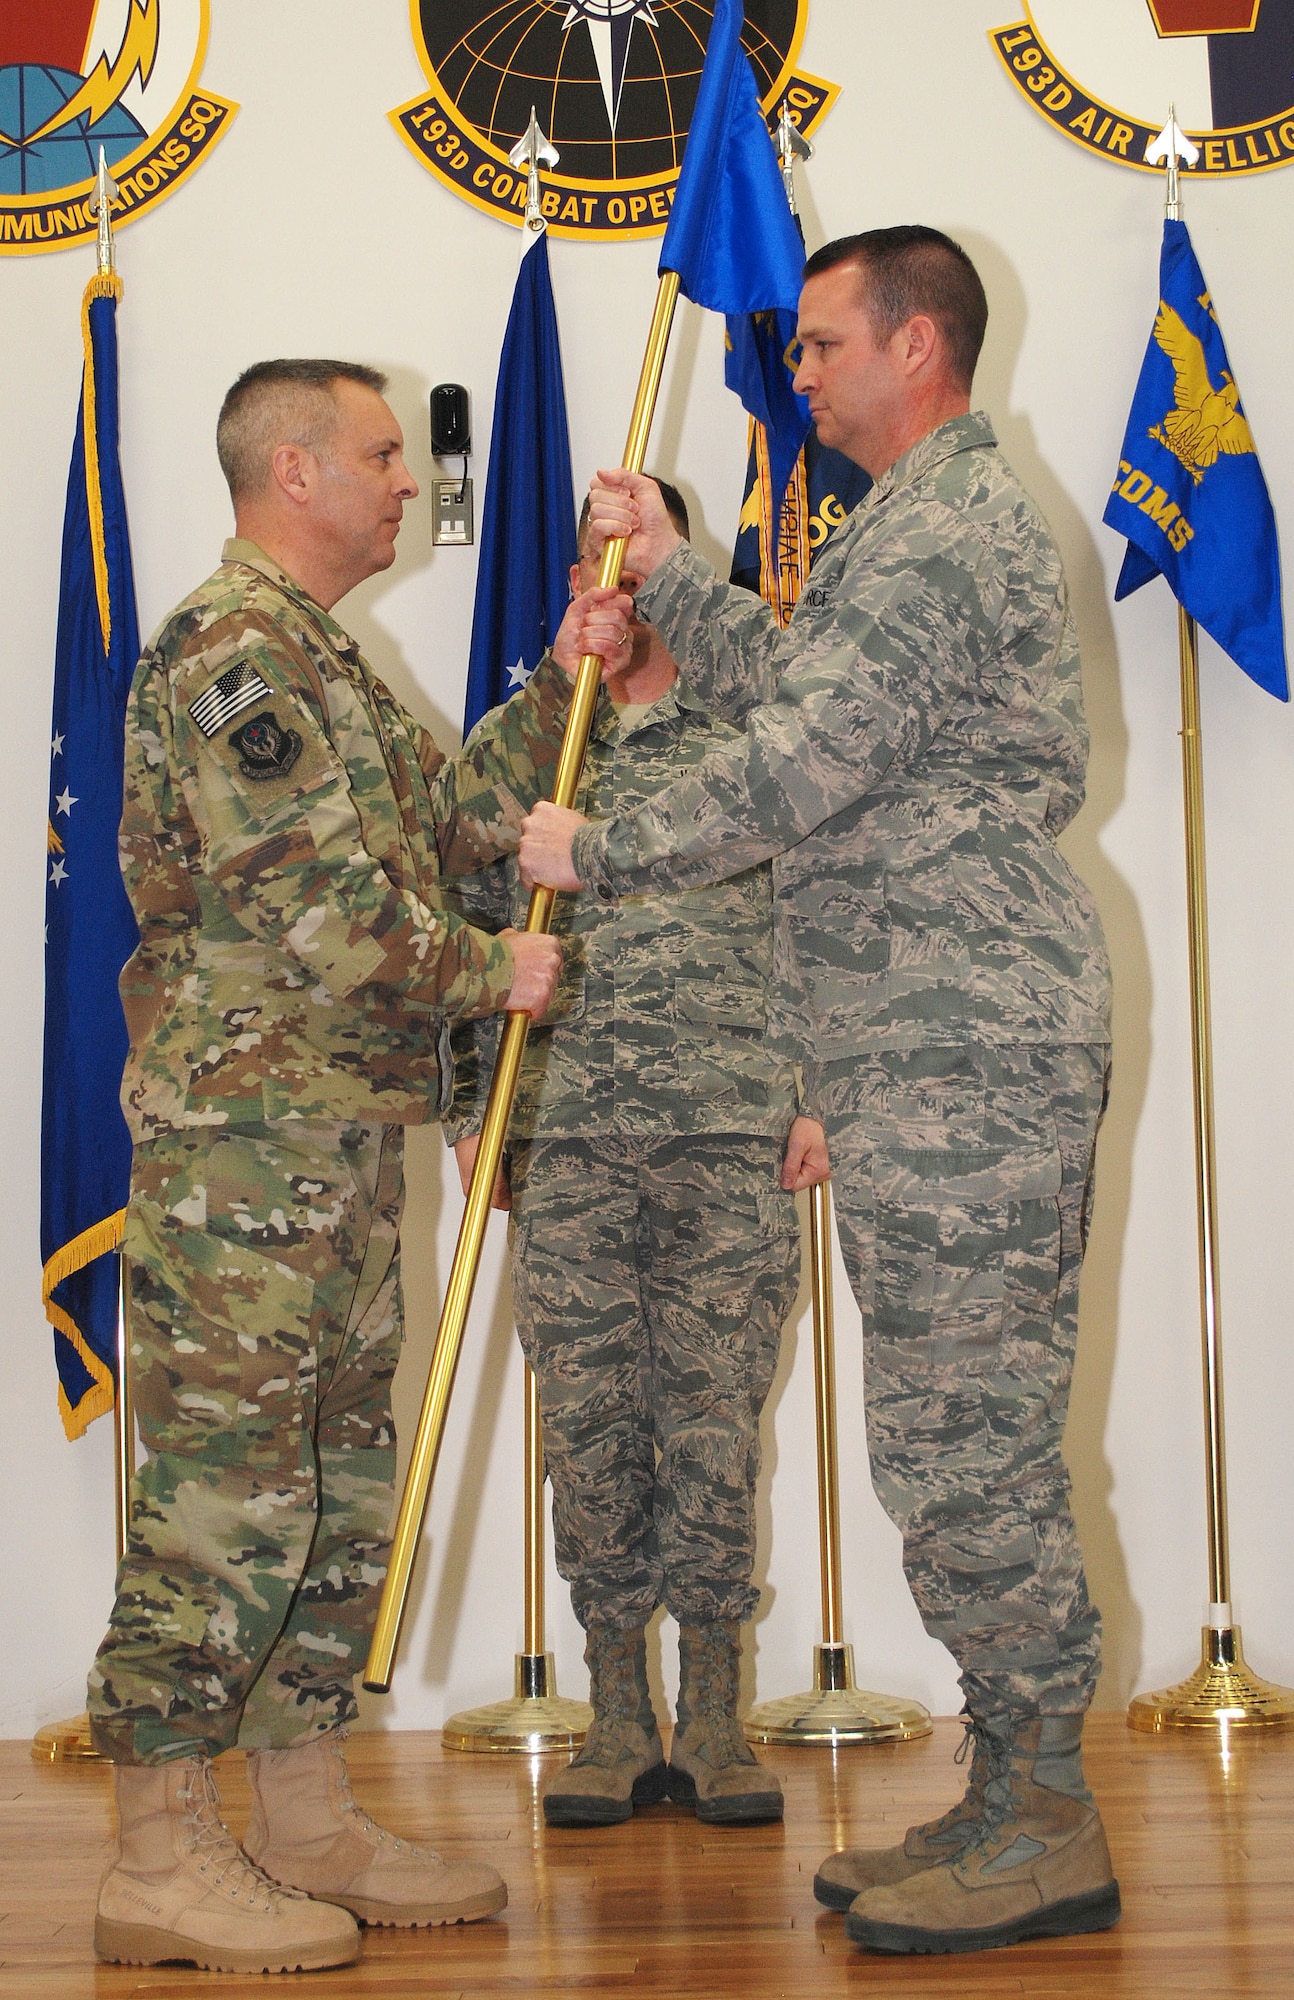 Col. Adam Marshall (right) assumed command of the 193rd Combat Operations Squadron, State College, Pennsylvania, during an assumption of command ceremony held at the unit March 11.